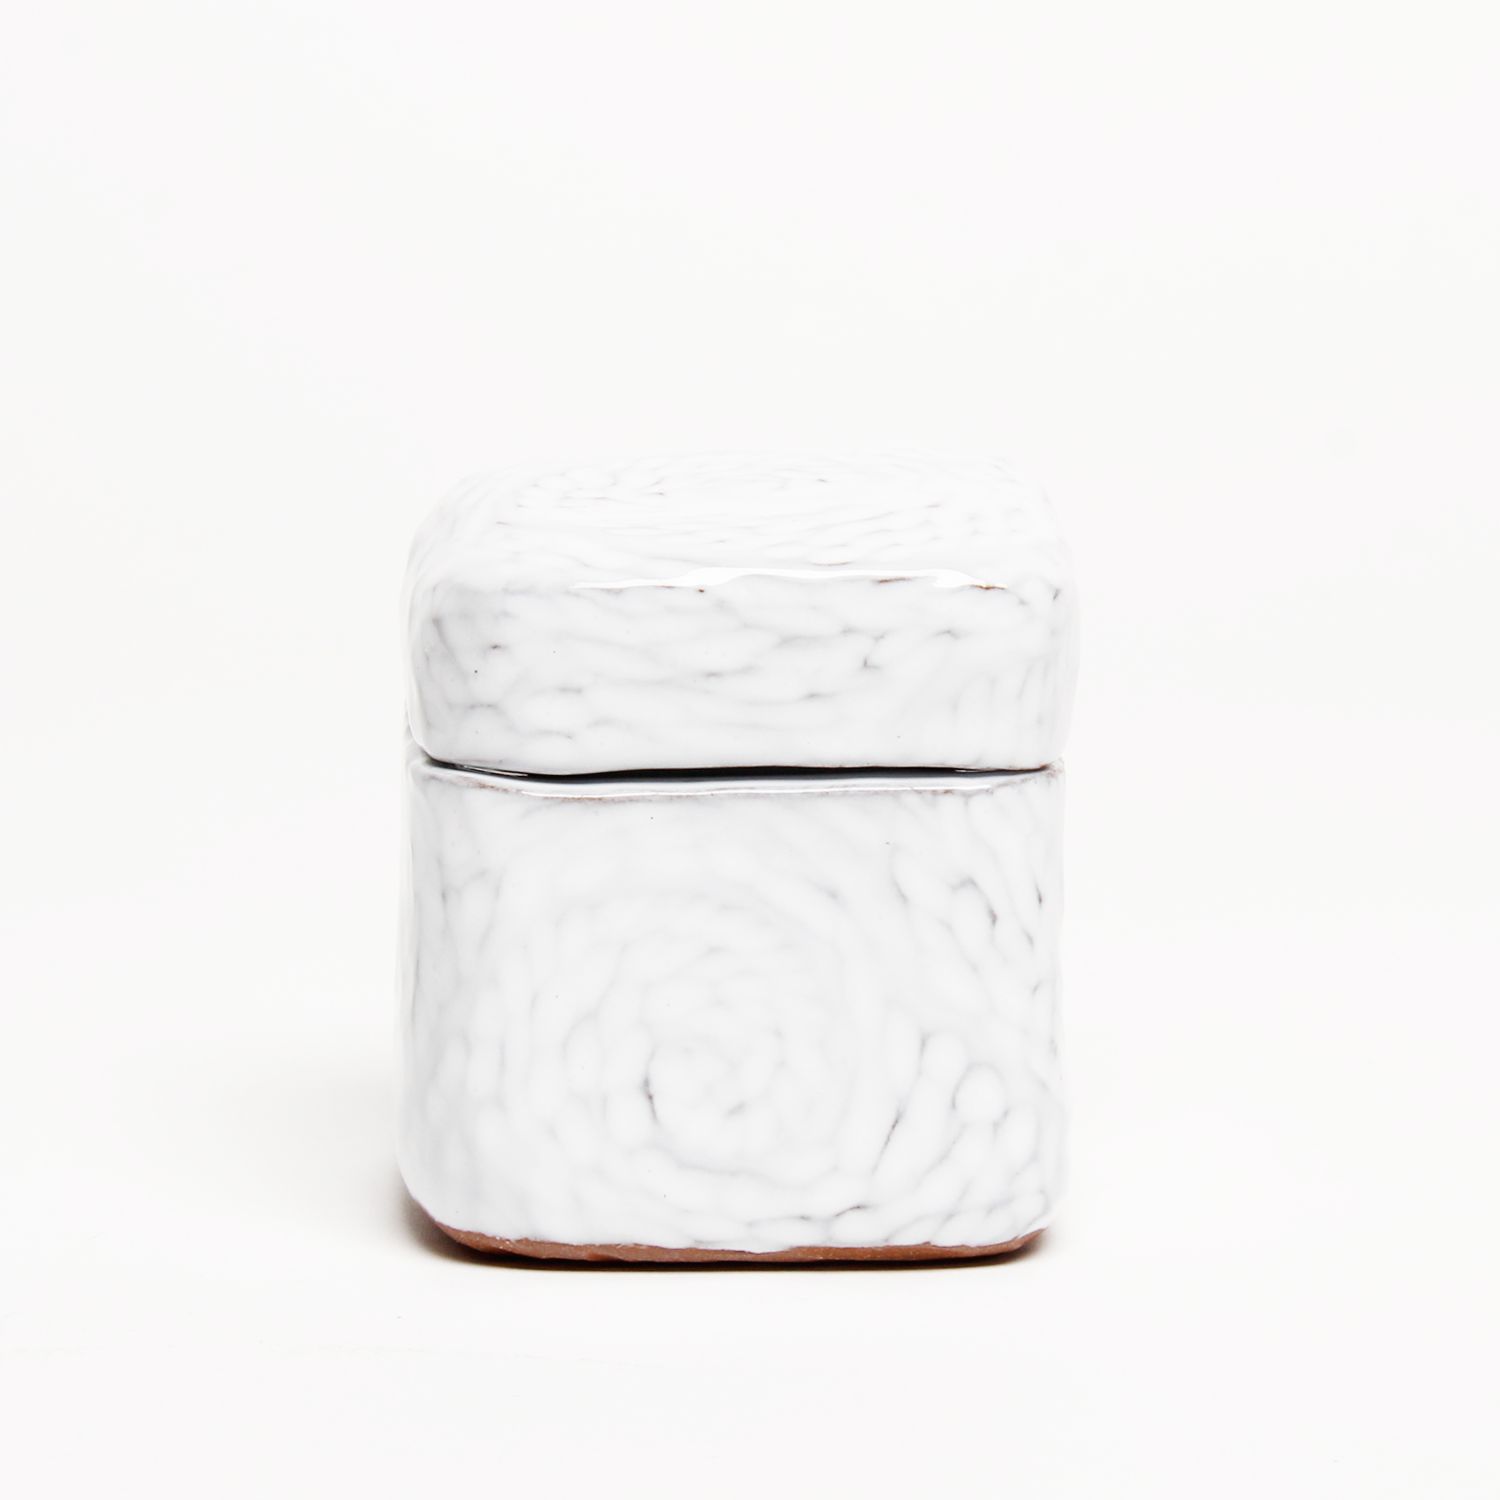 Jacquie Blondin: Cube Container Product Image 1 of 3